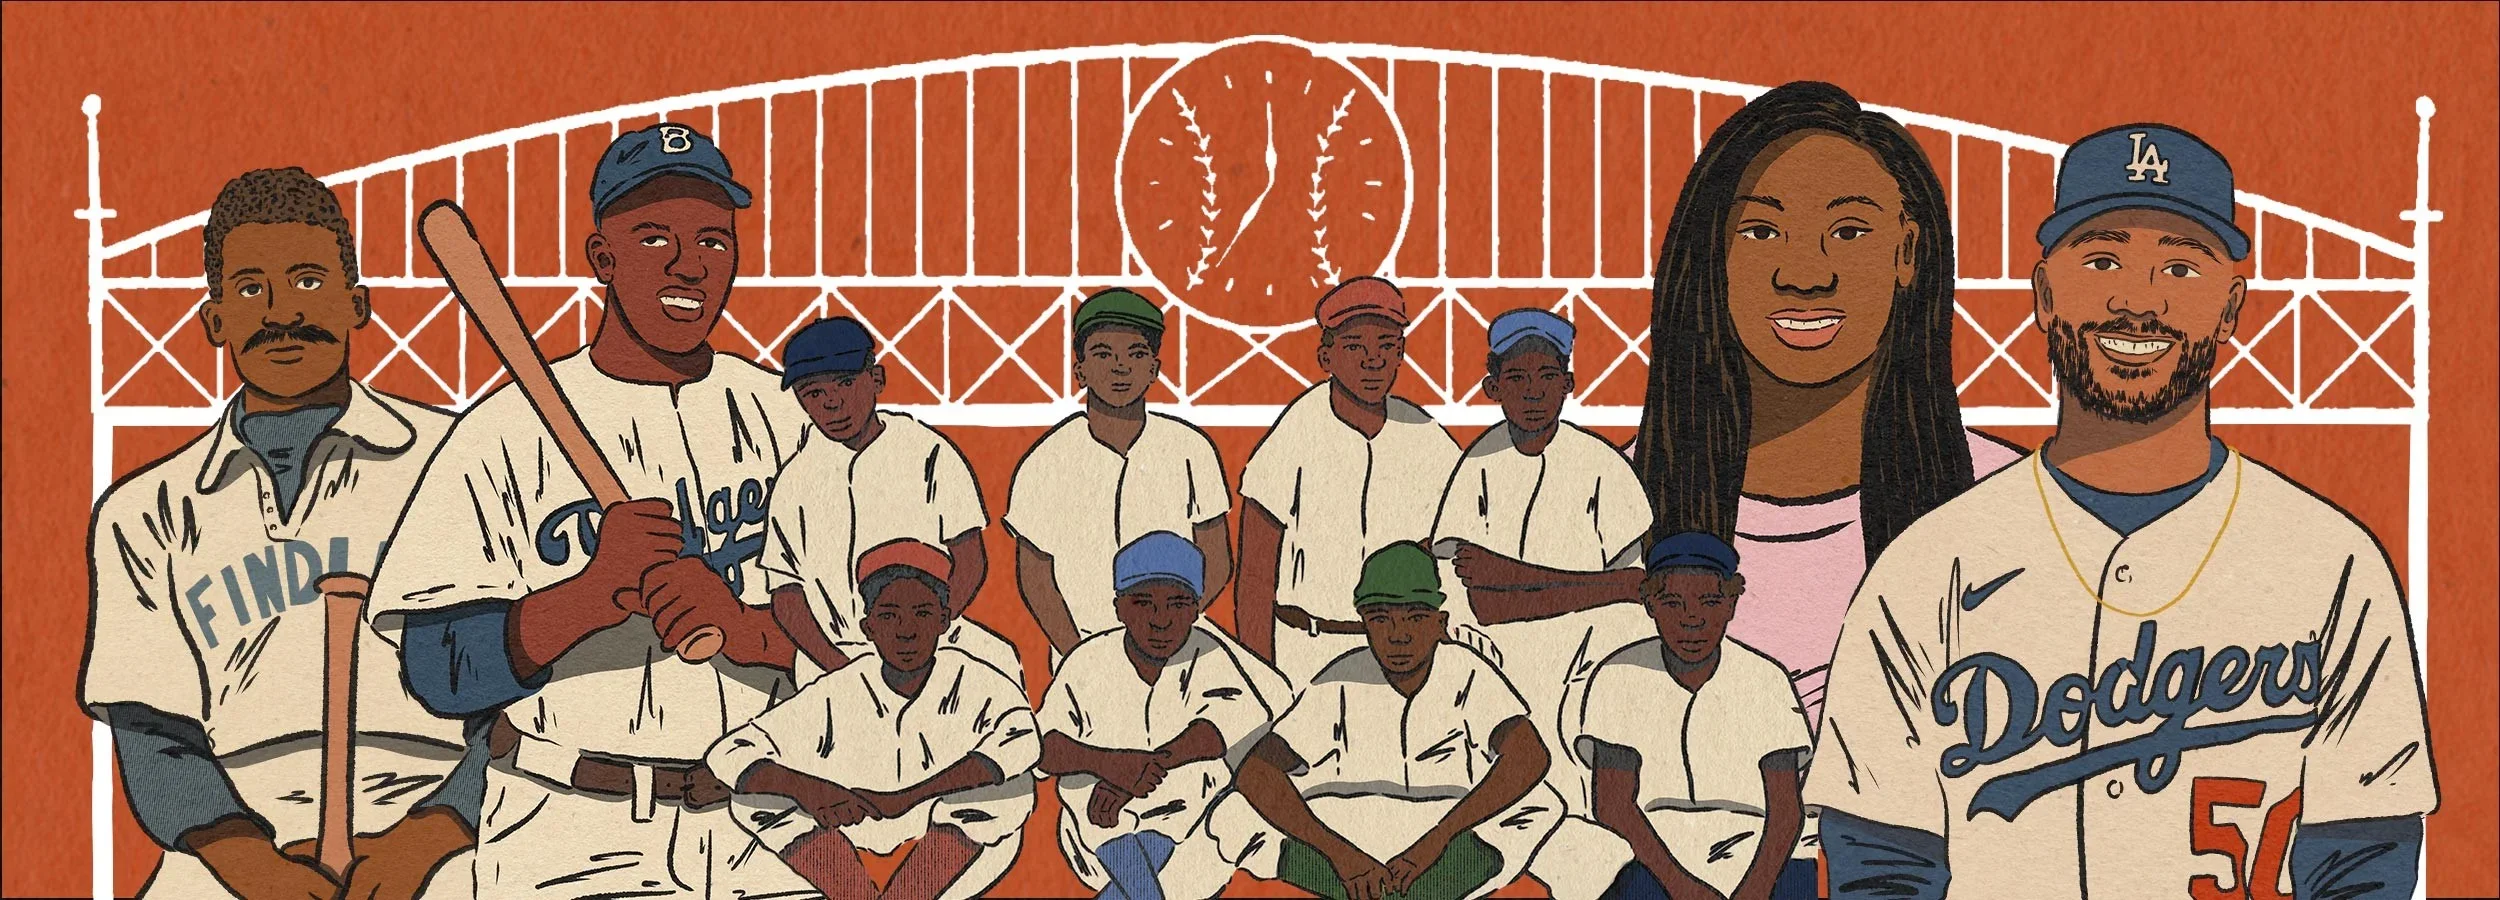 Illustration featuring from l-r Bud Fowler, Jackie Robinson, Cannon Street All-Stars, Mo' ne Davis and Mookie Betts 